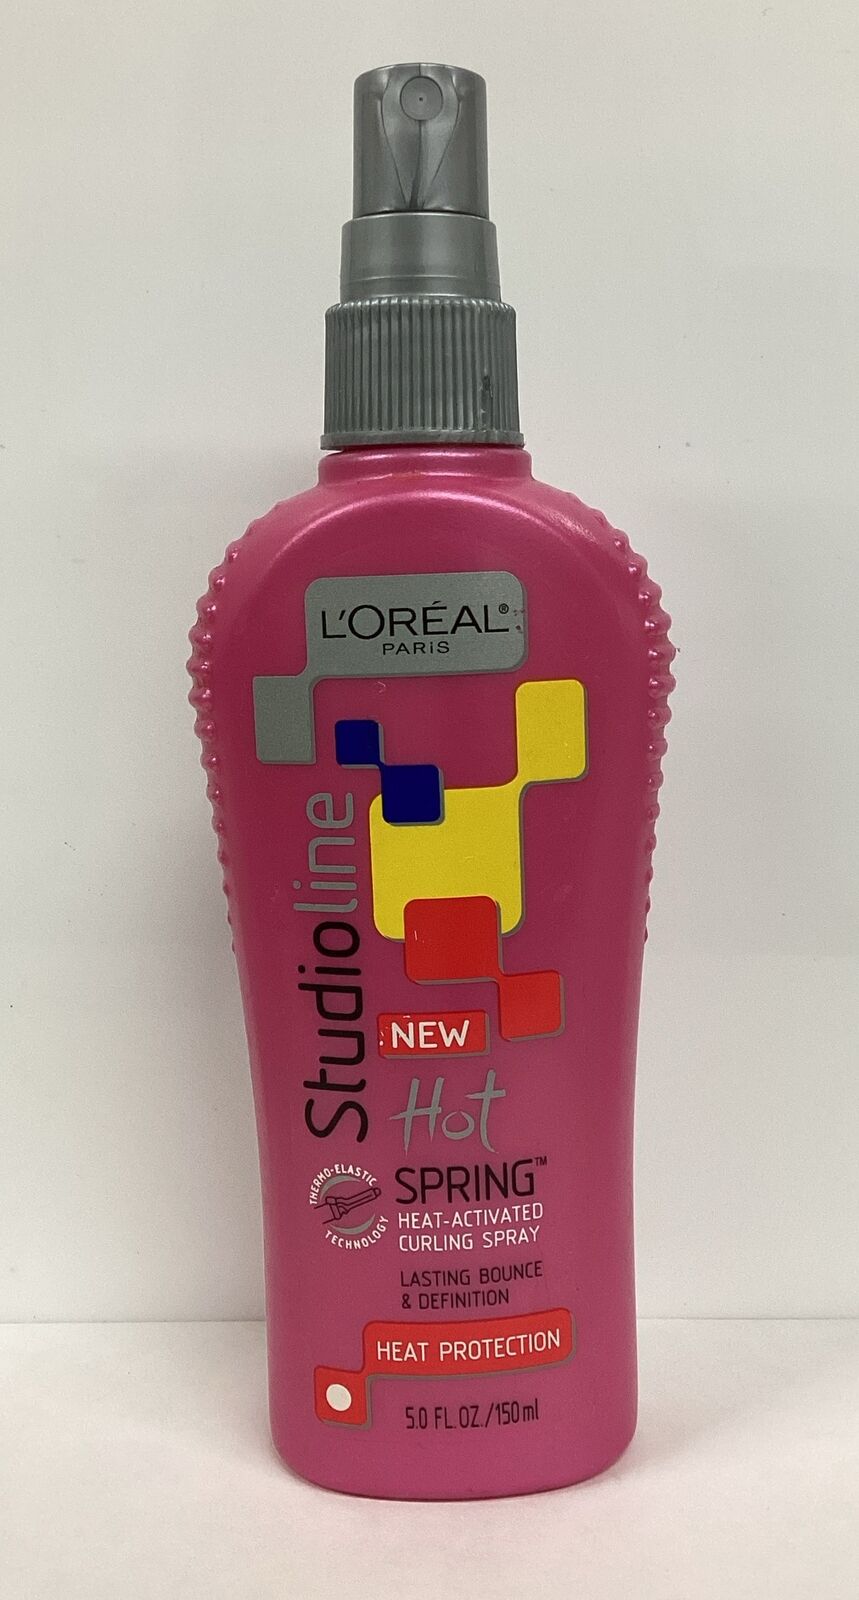 L\'oreal HOT SPRING Heat-Activated Curling Spray, Lasting Bounce & Definition 5oz